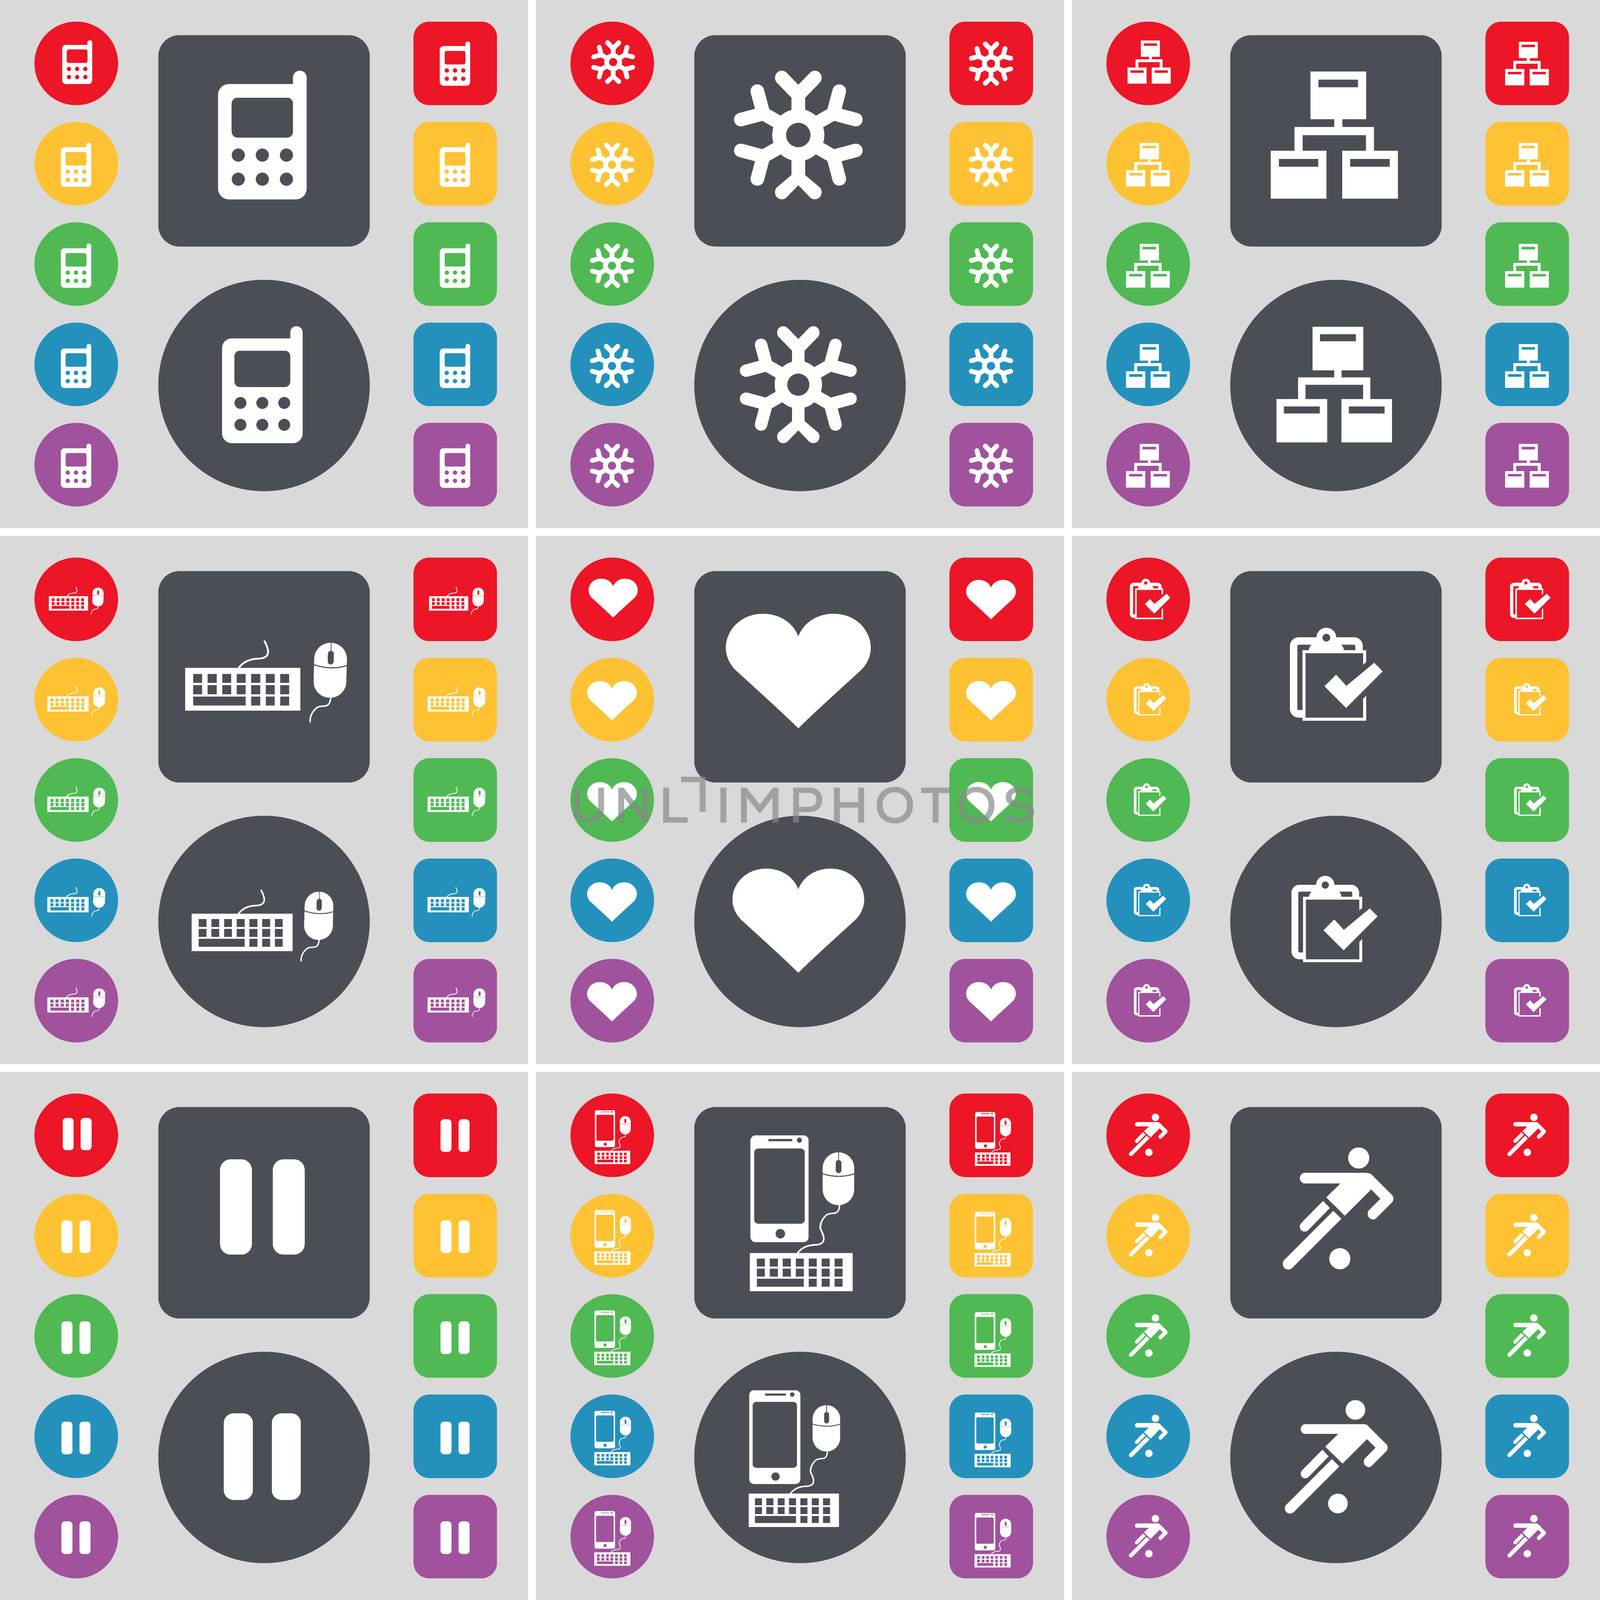 Mobile phone, Snowflake, Network, Keyboard, Heart, Survey, Pause, Smartphone, Football icon symbol. A large set of flat, colored buttons for your design. illustration